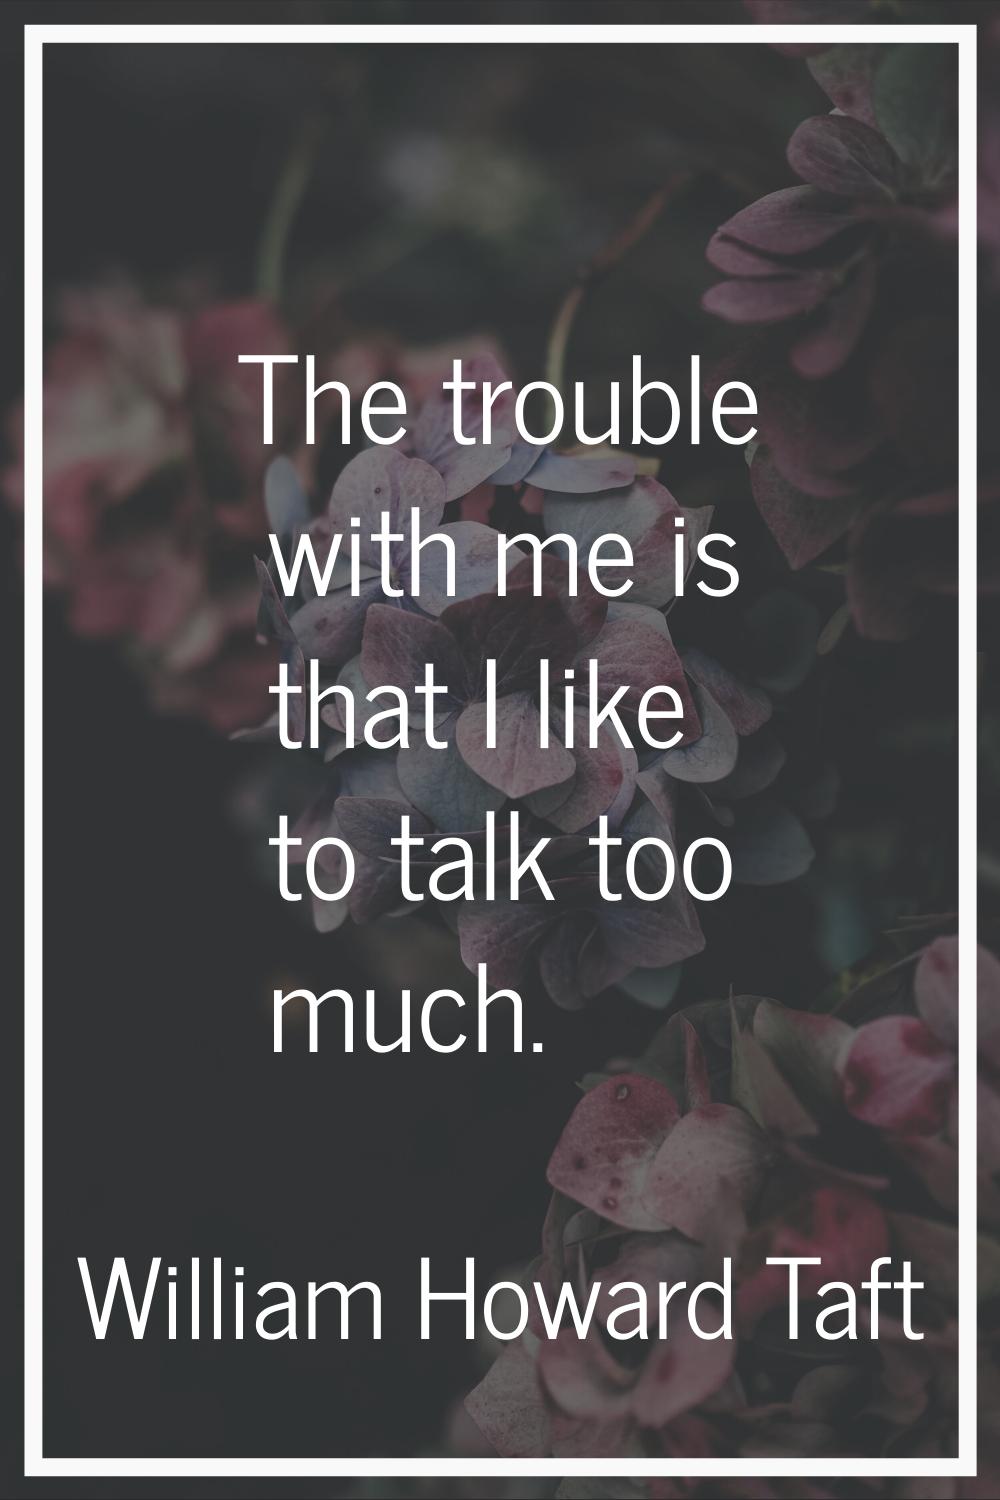 The trouble with me is that I like to talk too much.